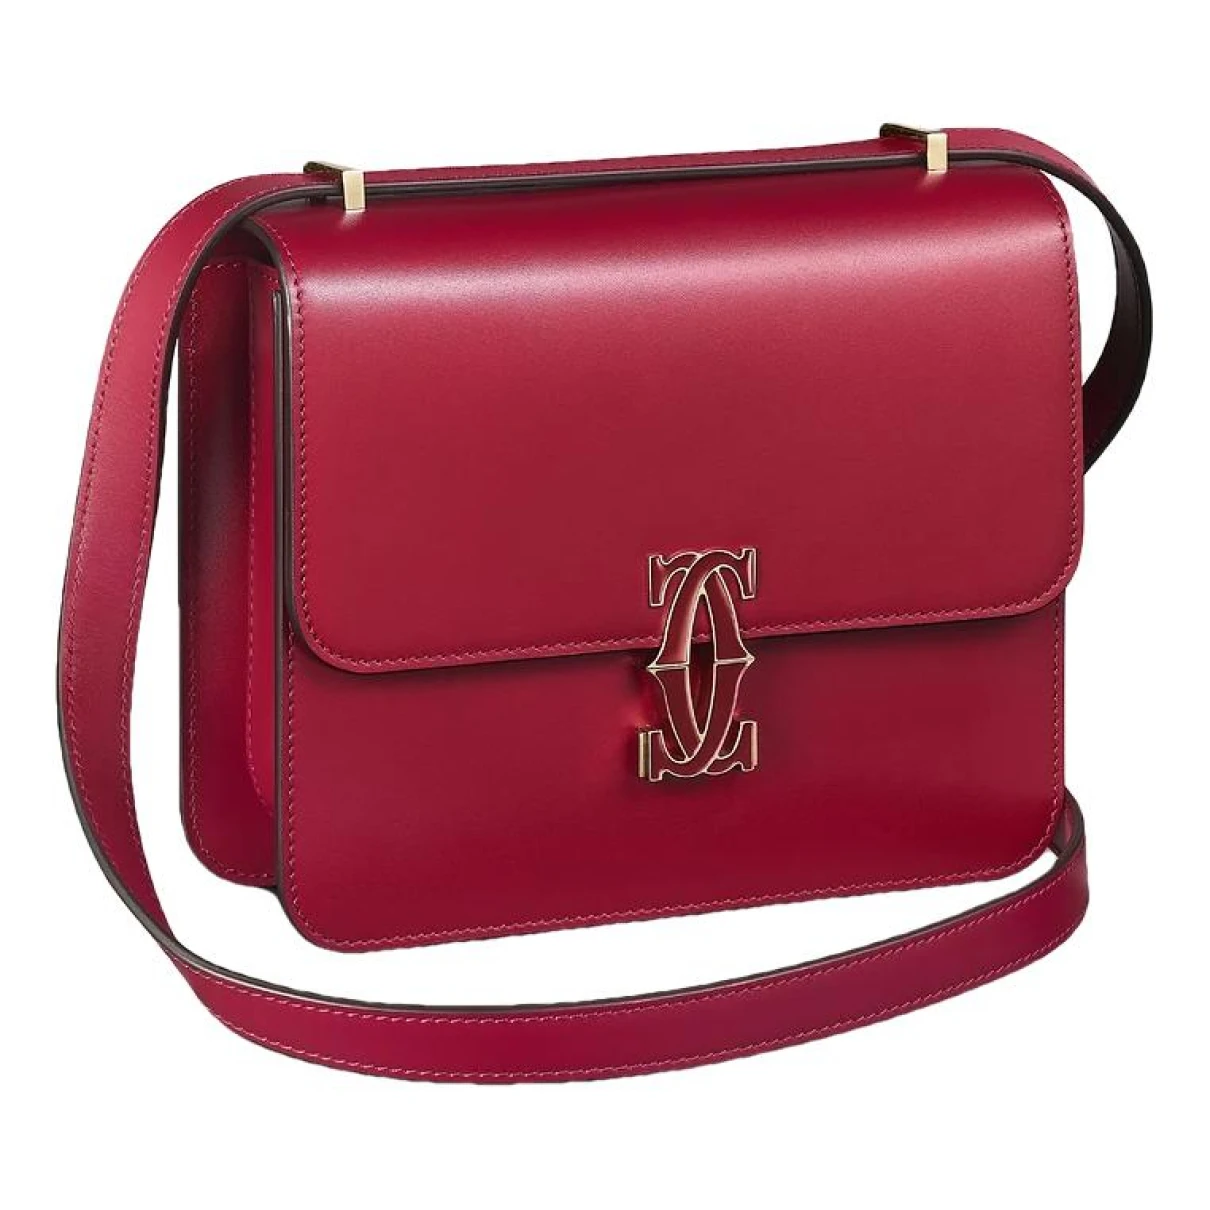 Pre-owned Cartier C Leather Handbag In Red